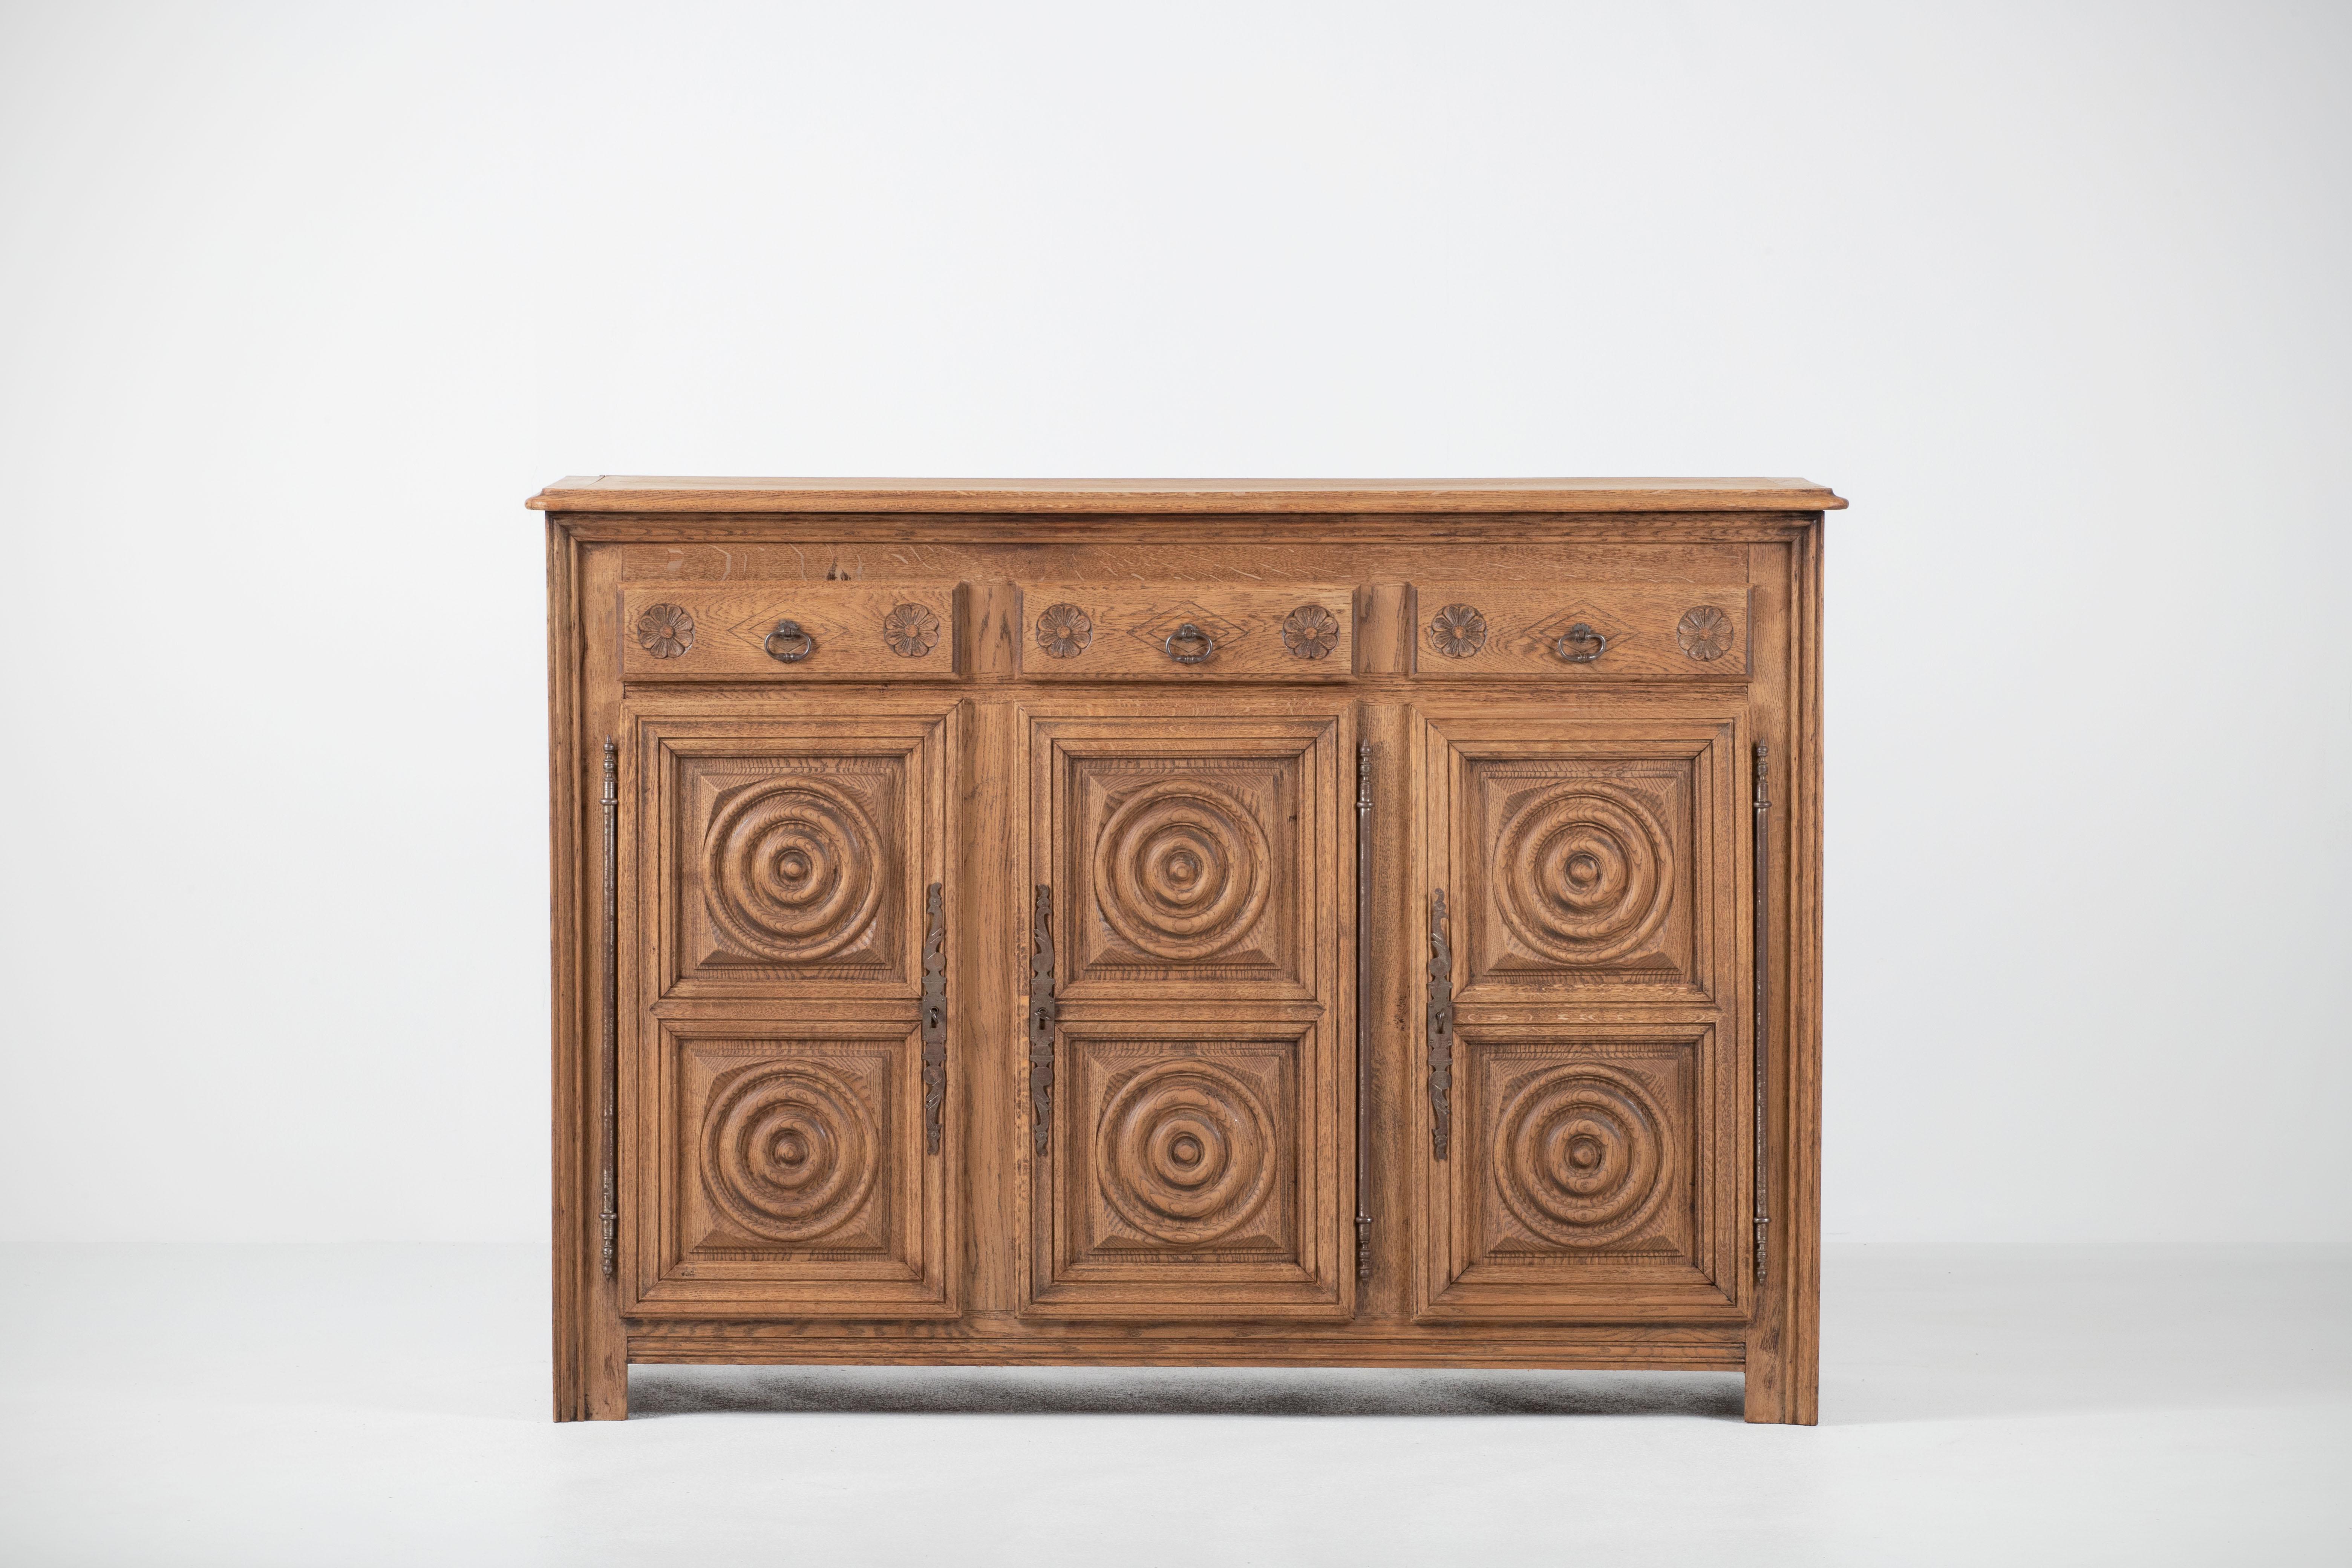 Unearthed in Normandy, this Breton style piece of furniture in solid oak will bring a touch of authenticity to an interior.
The sideboard consists of three compartments with shelves whose doors are covered with circular patterns typical of the